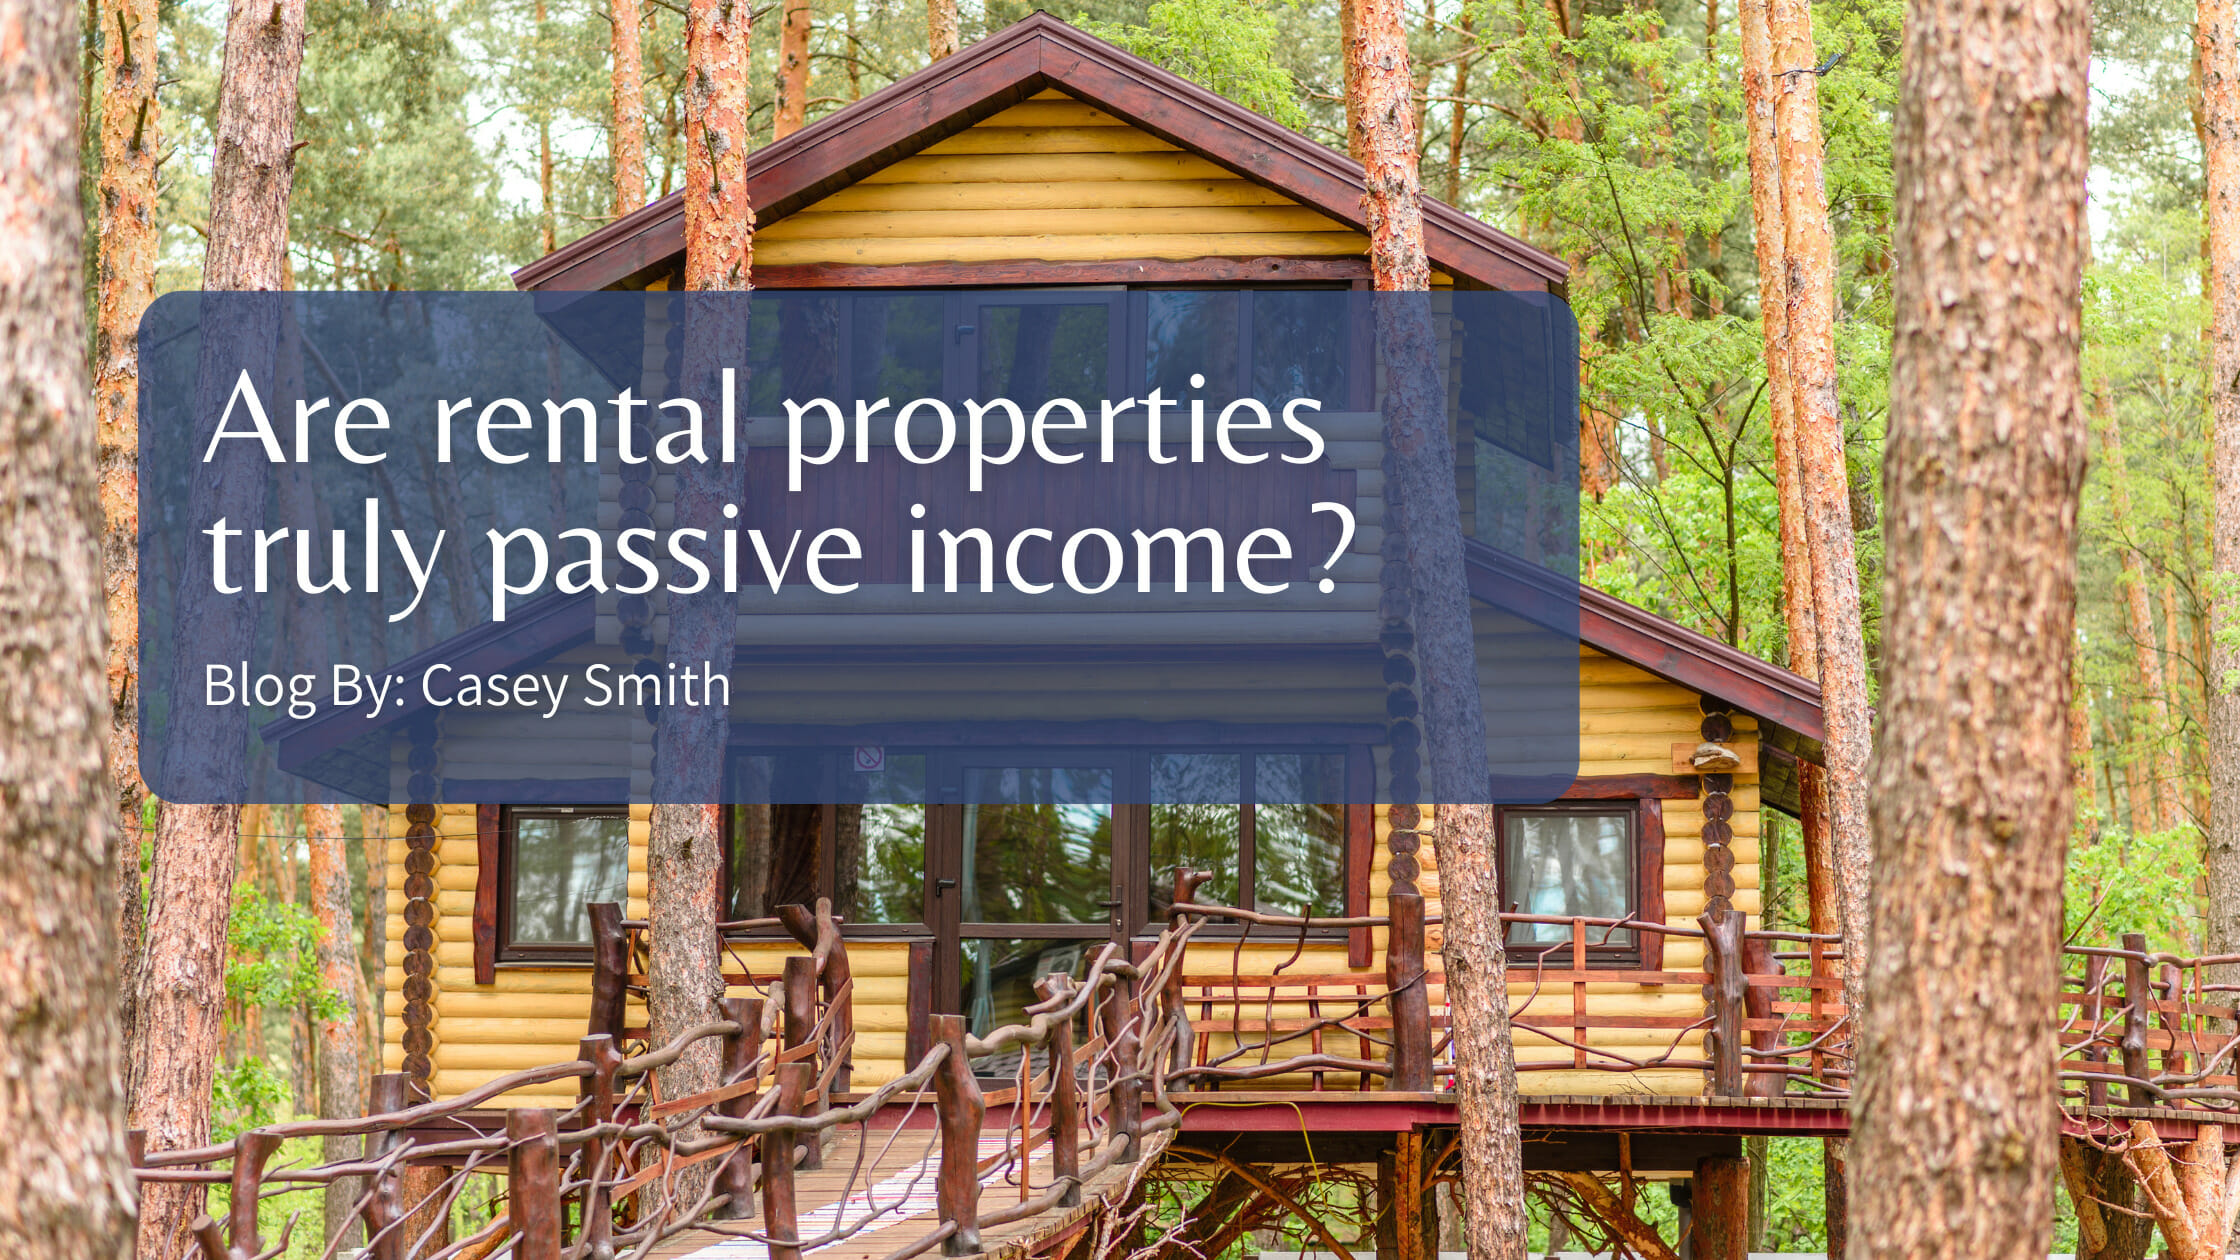 Are rental properties truly passive income?